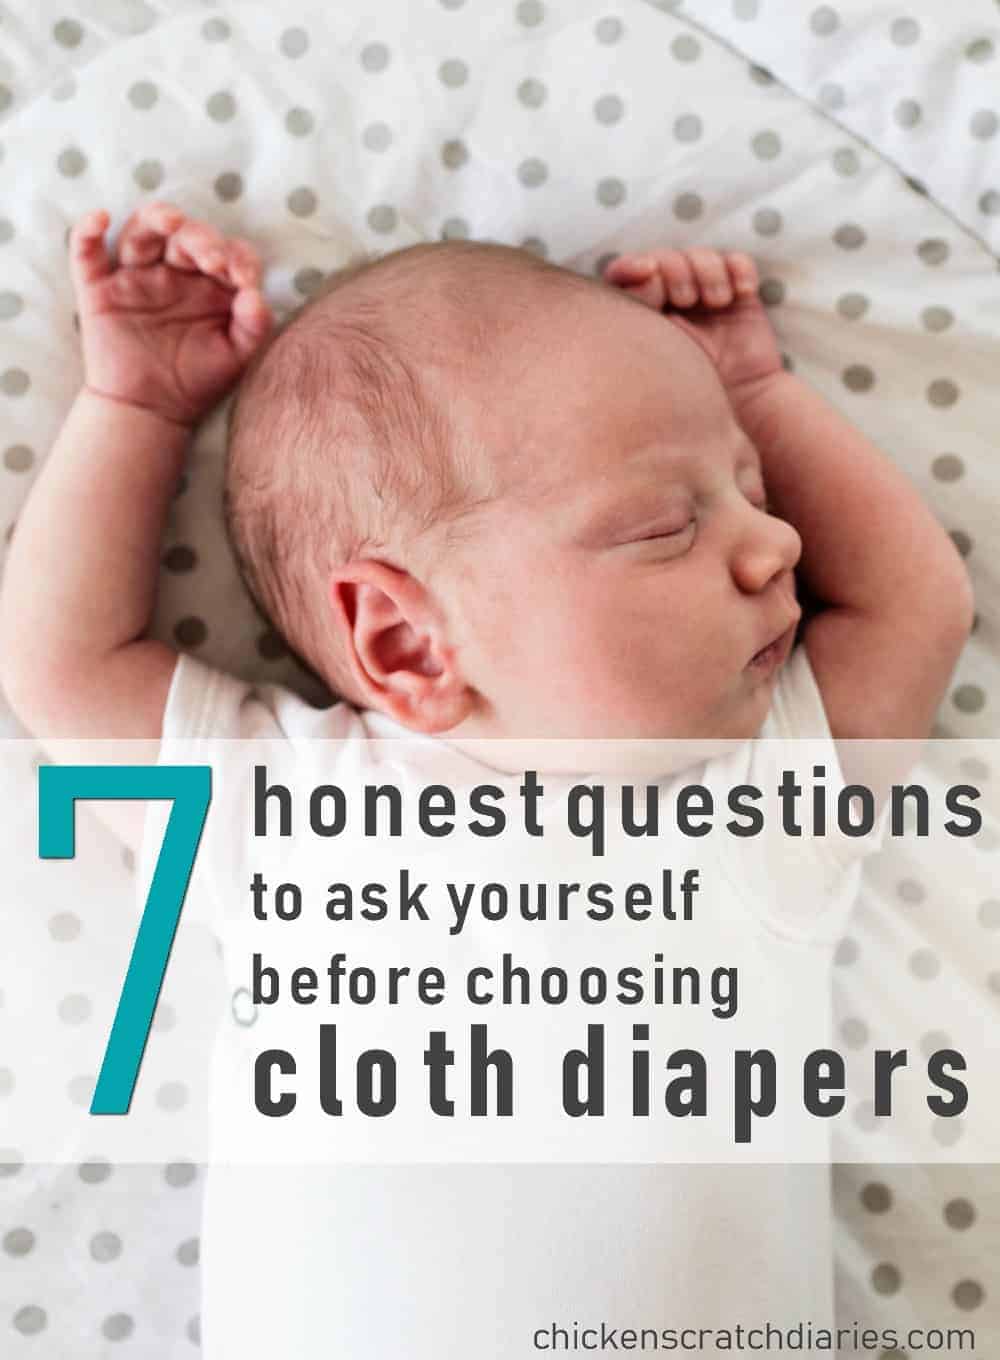 Image of baby sleeping in crib with arms outstretched, with text overlay "7 honest questions to ask yourself before choosing cloth diapers".